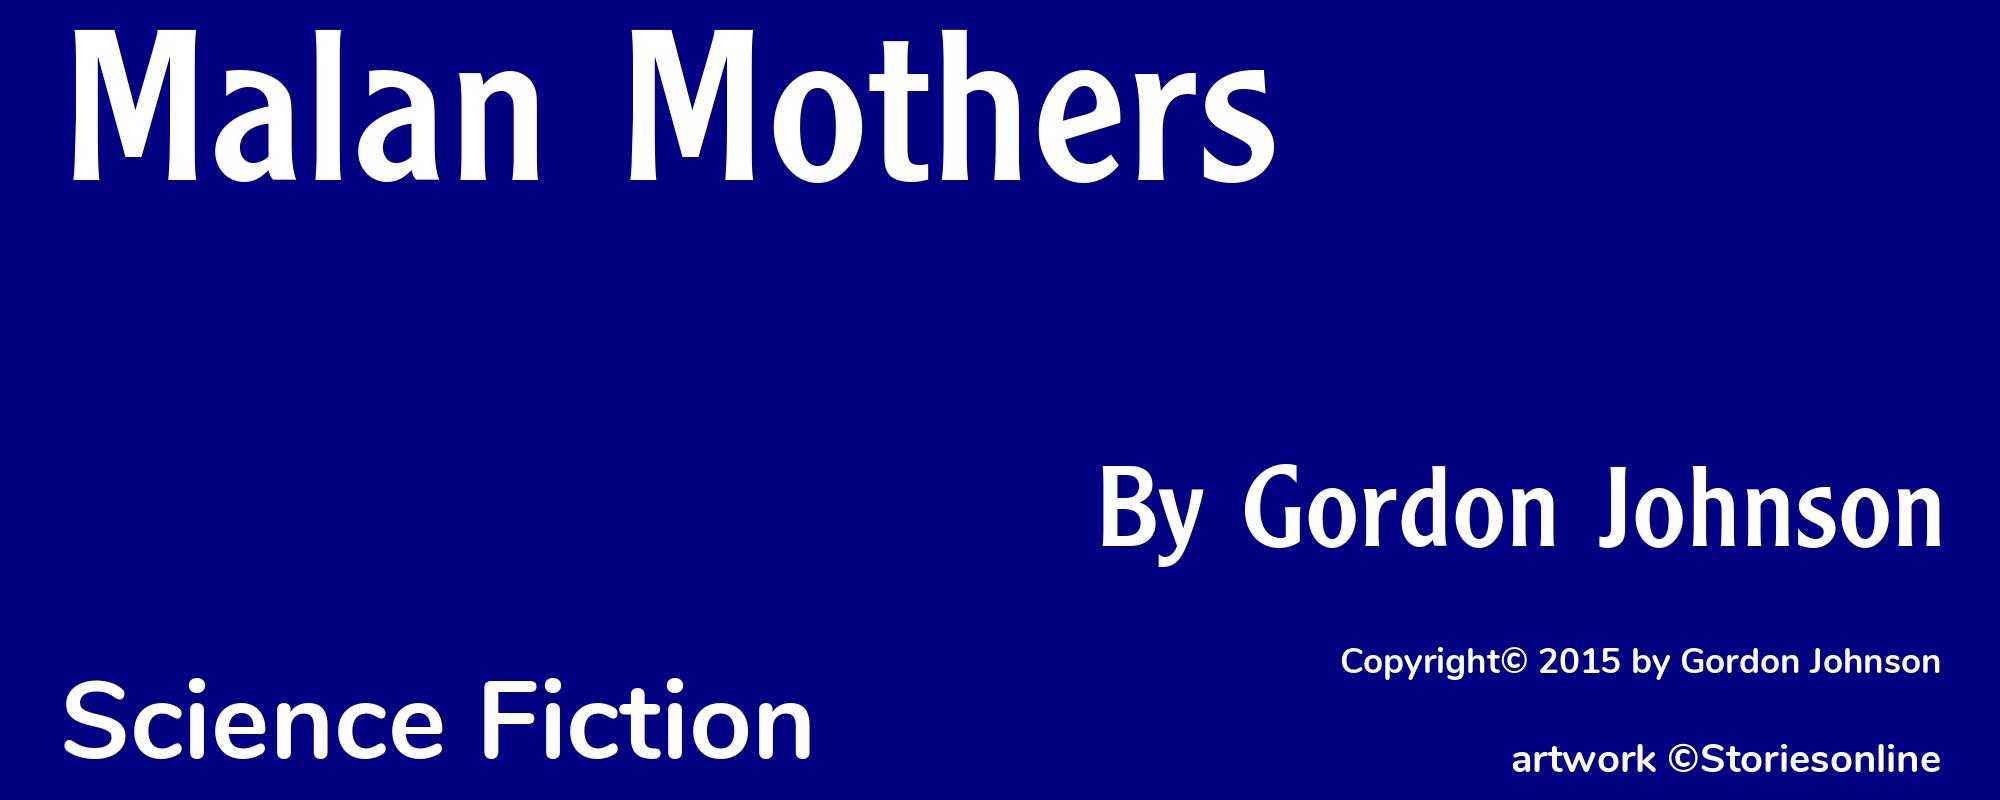 Malan Mothers - Cover